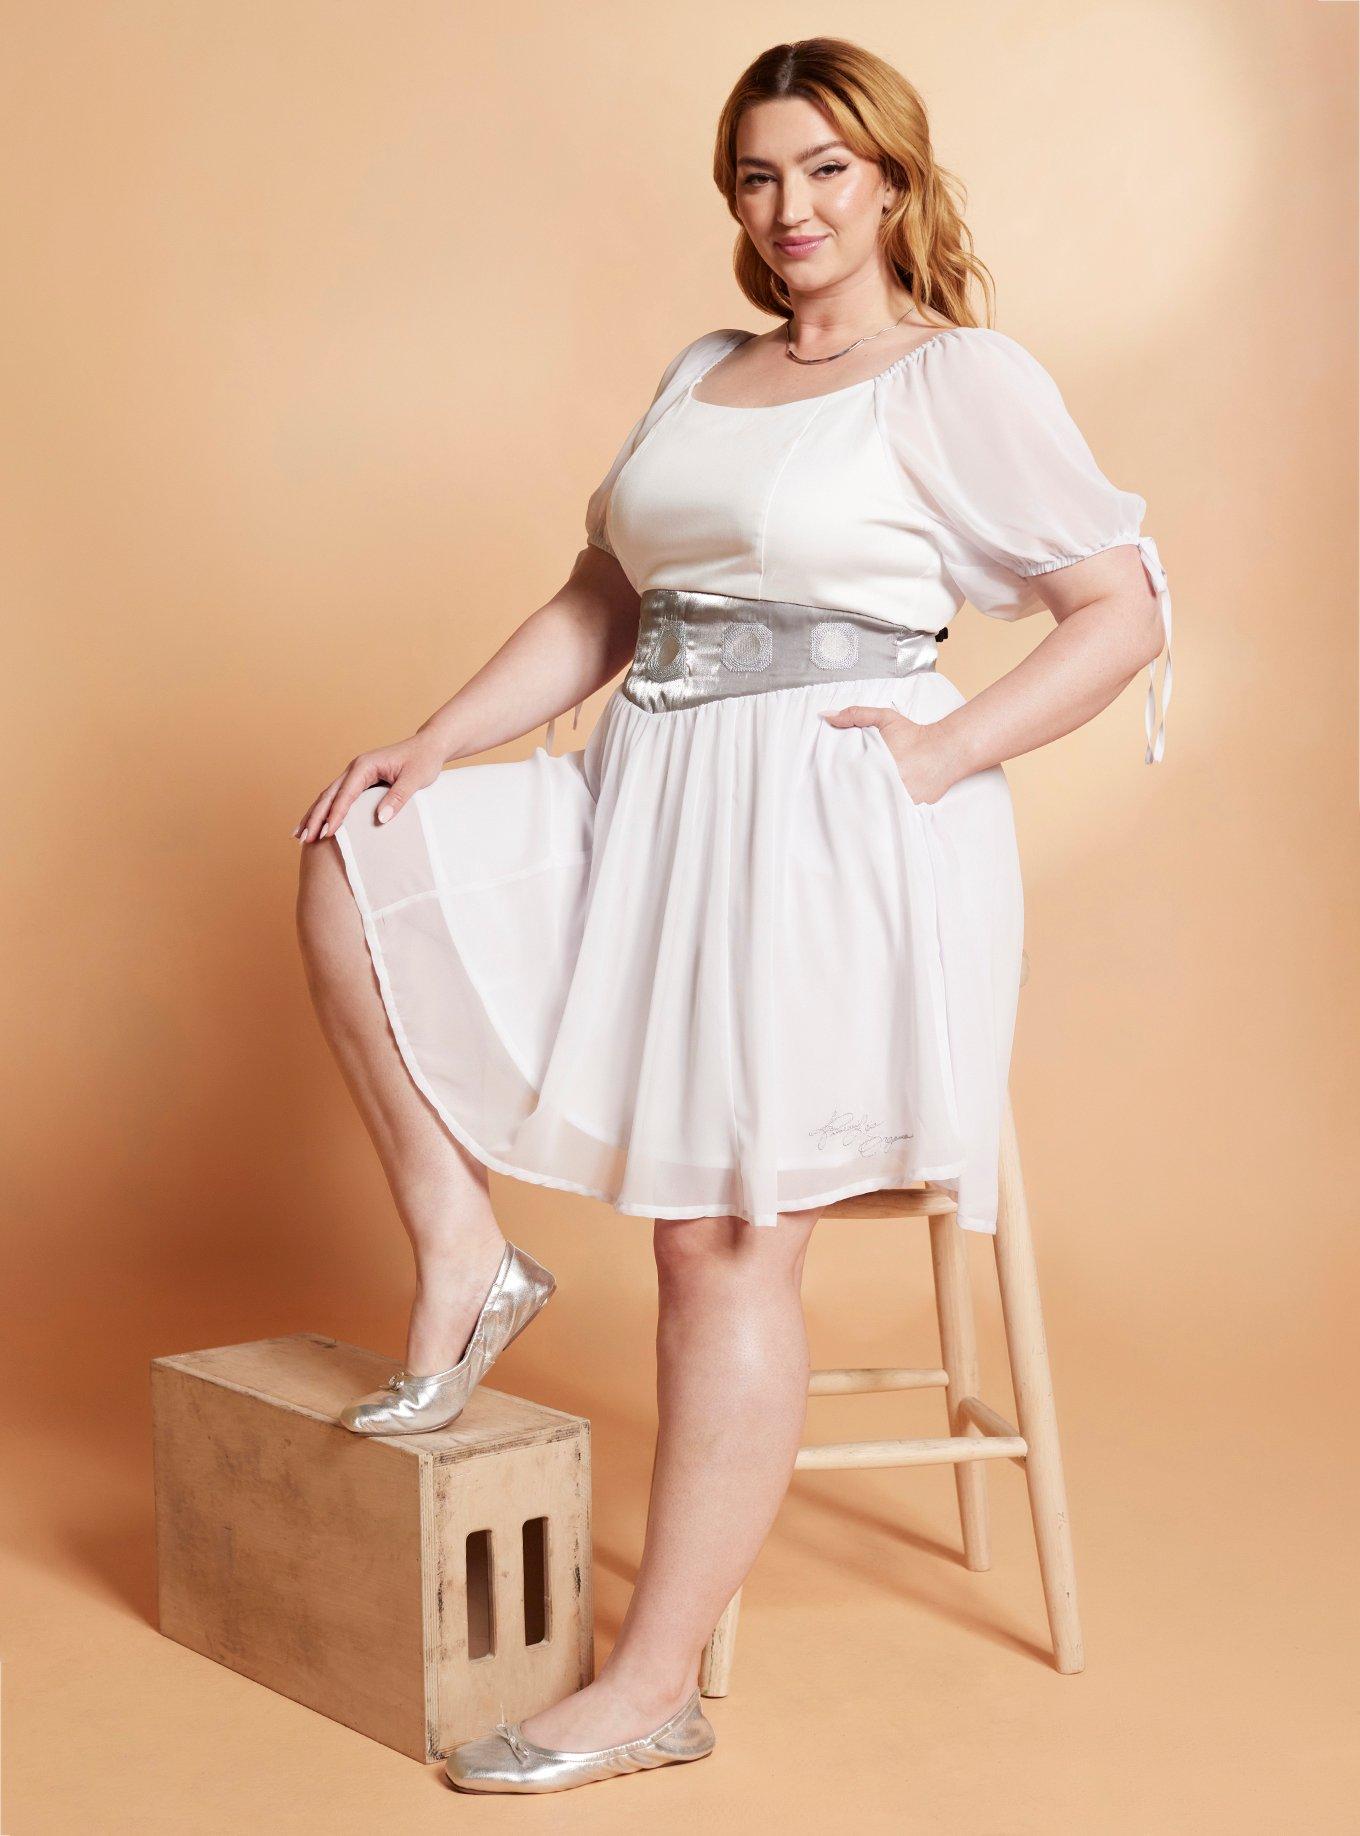 Her Universe Star Wars Princess Leia Puff Sleeve Dress Plus Size Her Universe Exclusive